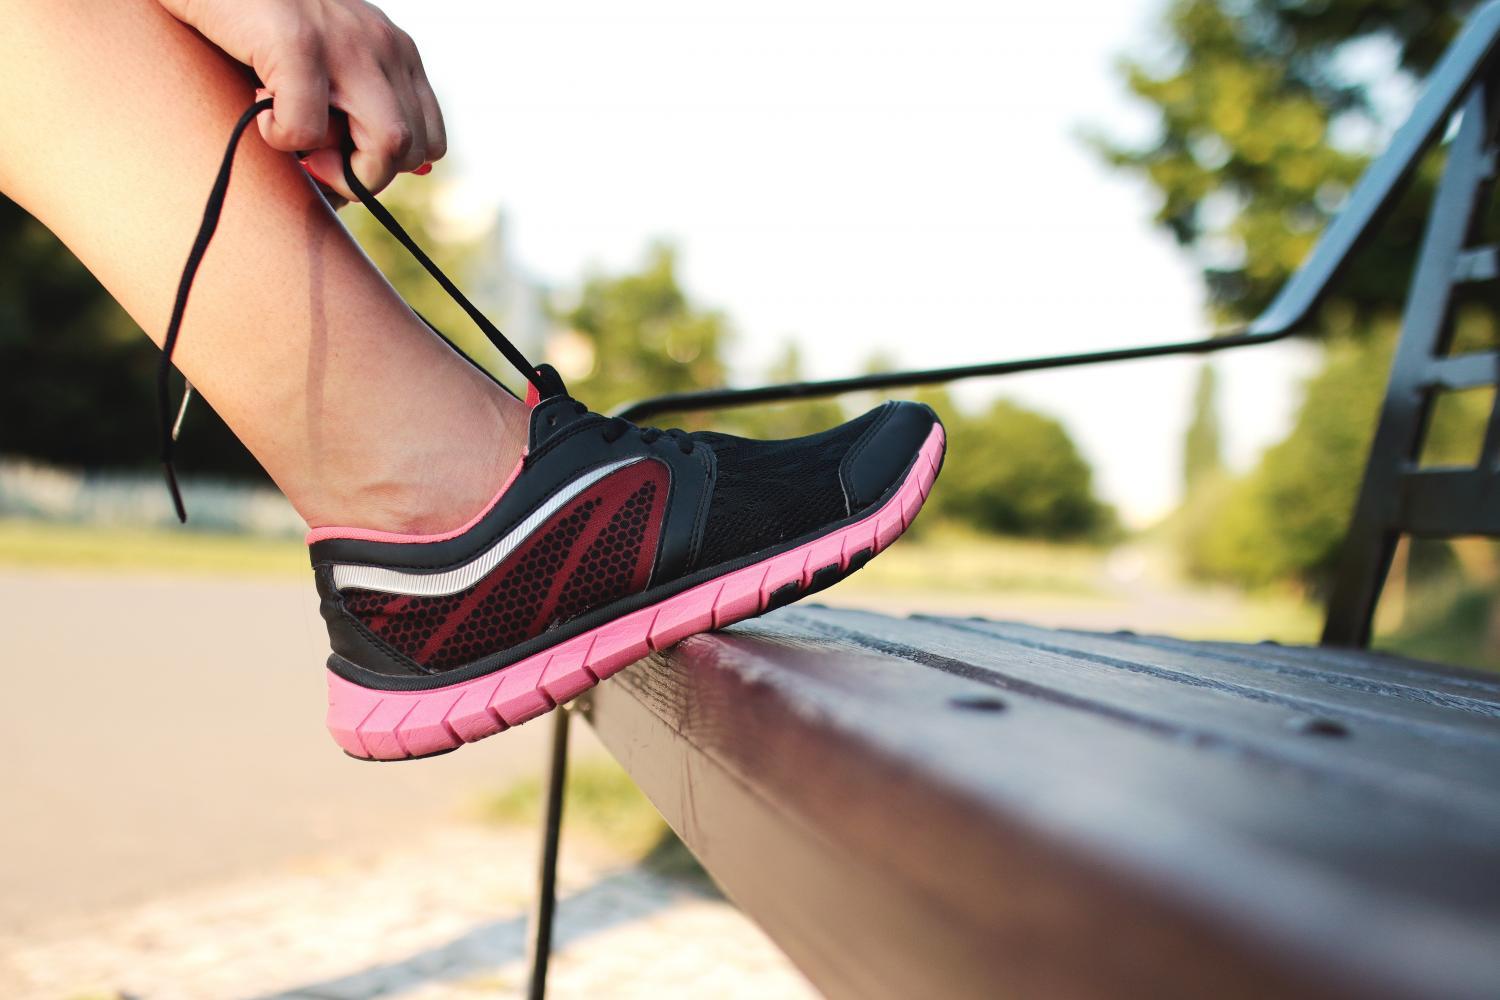 A woman ties her running shoe on a park bench.